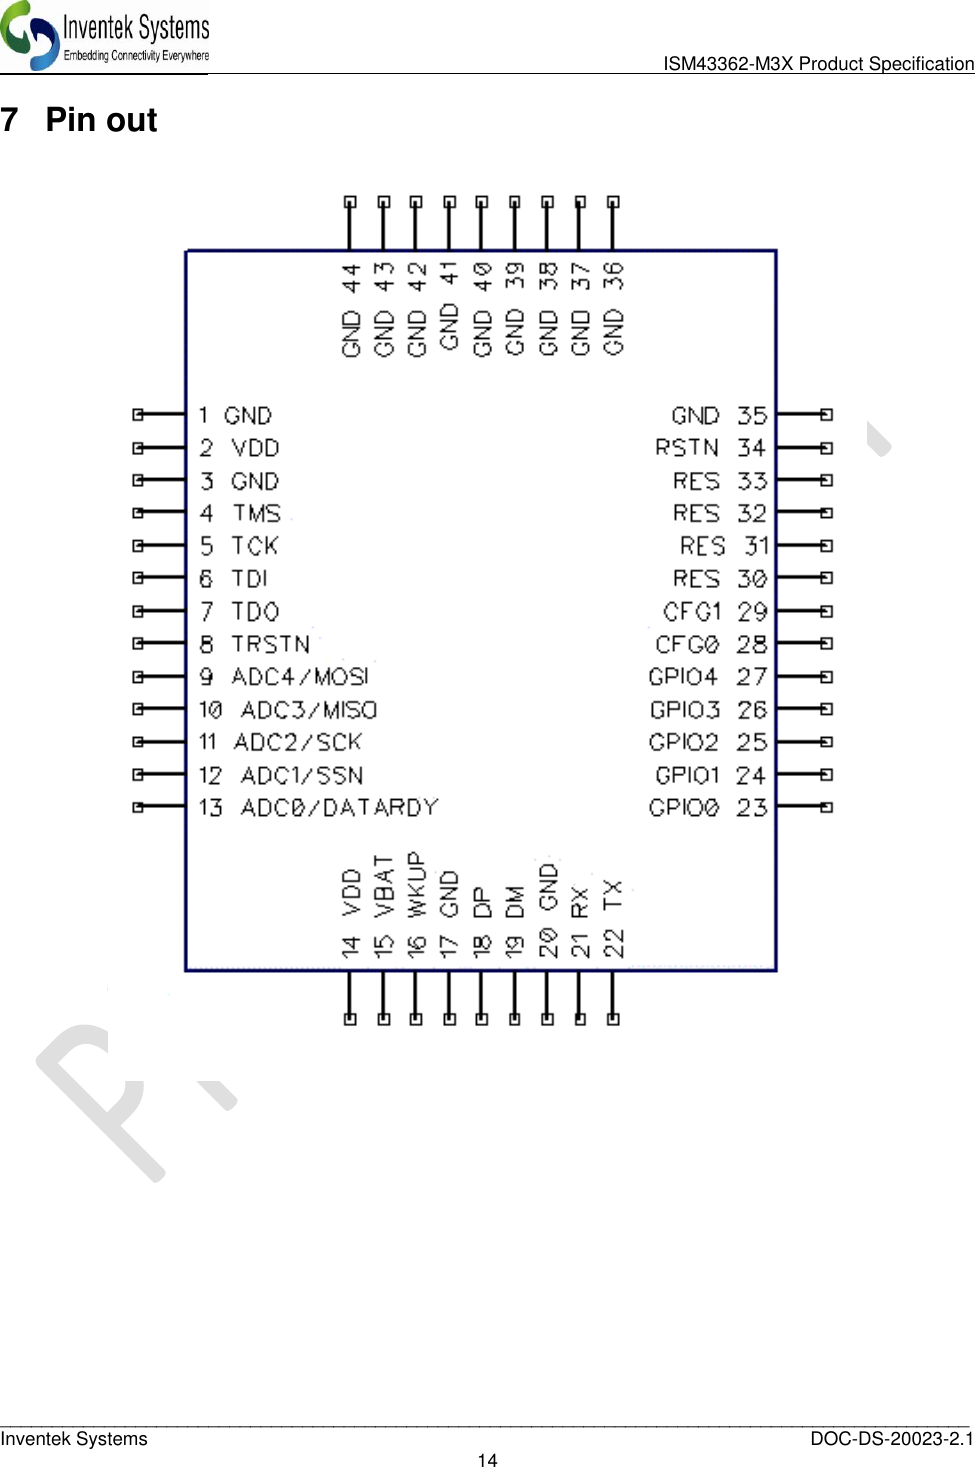                               ISM43362-M3X Product Specification _____________________________________________________________________________________________   Inventek Systems  DOC-DS-20023-2.1 14  7  Pin out           